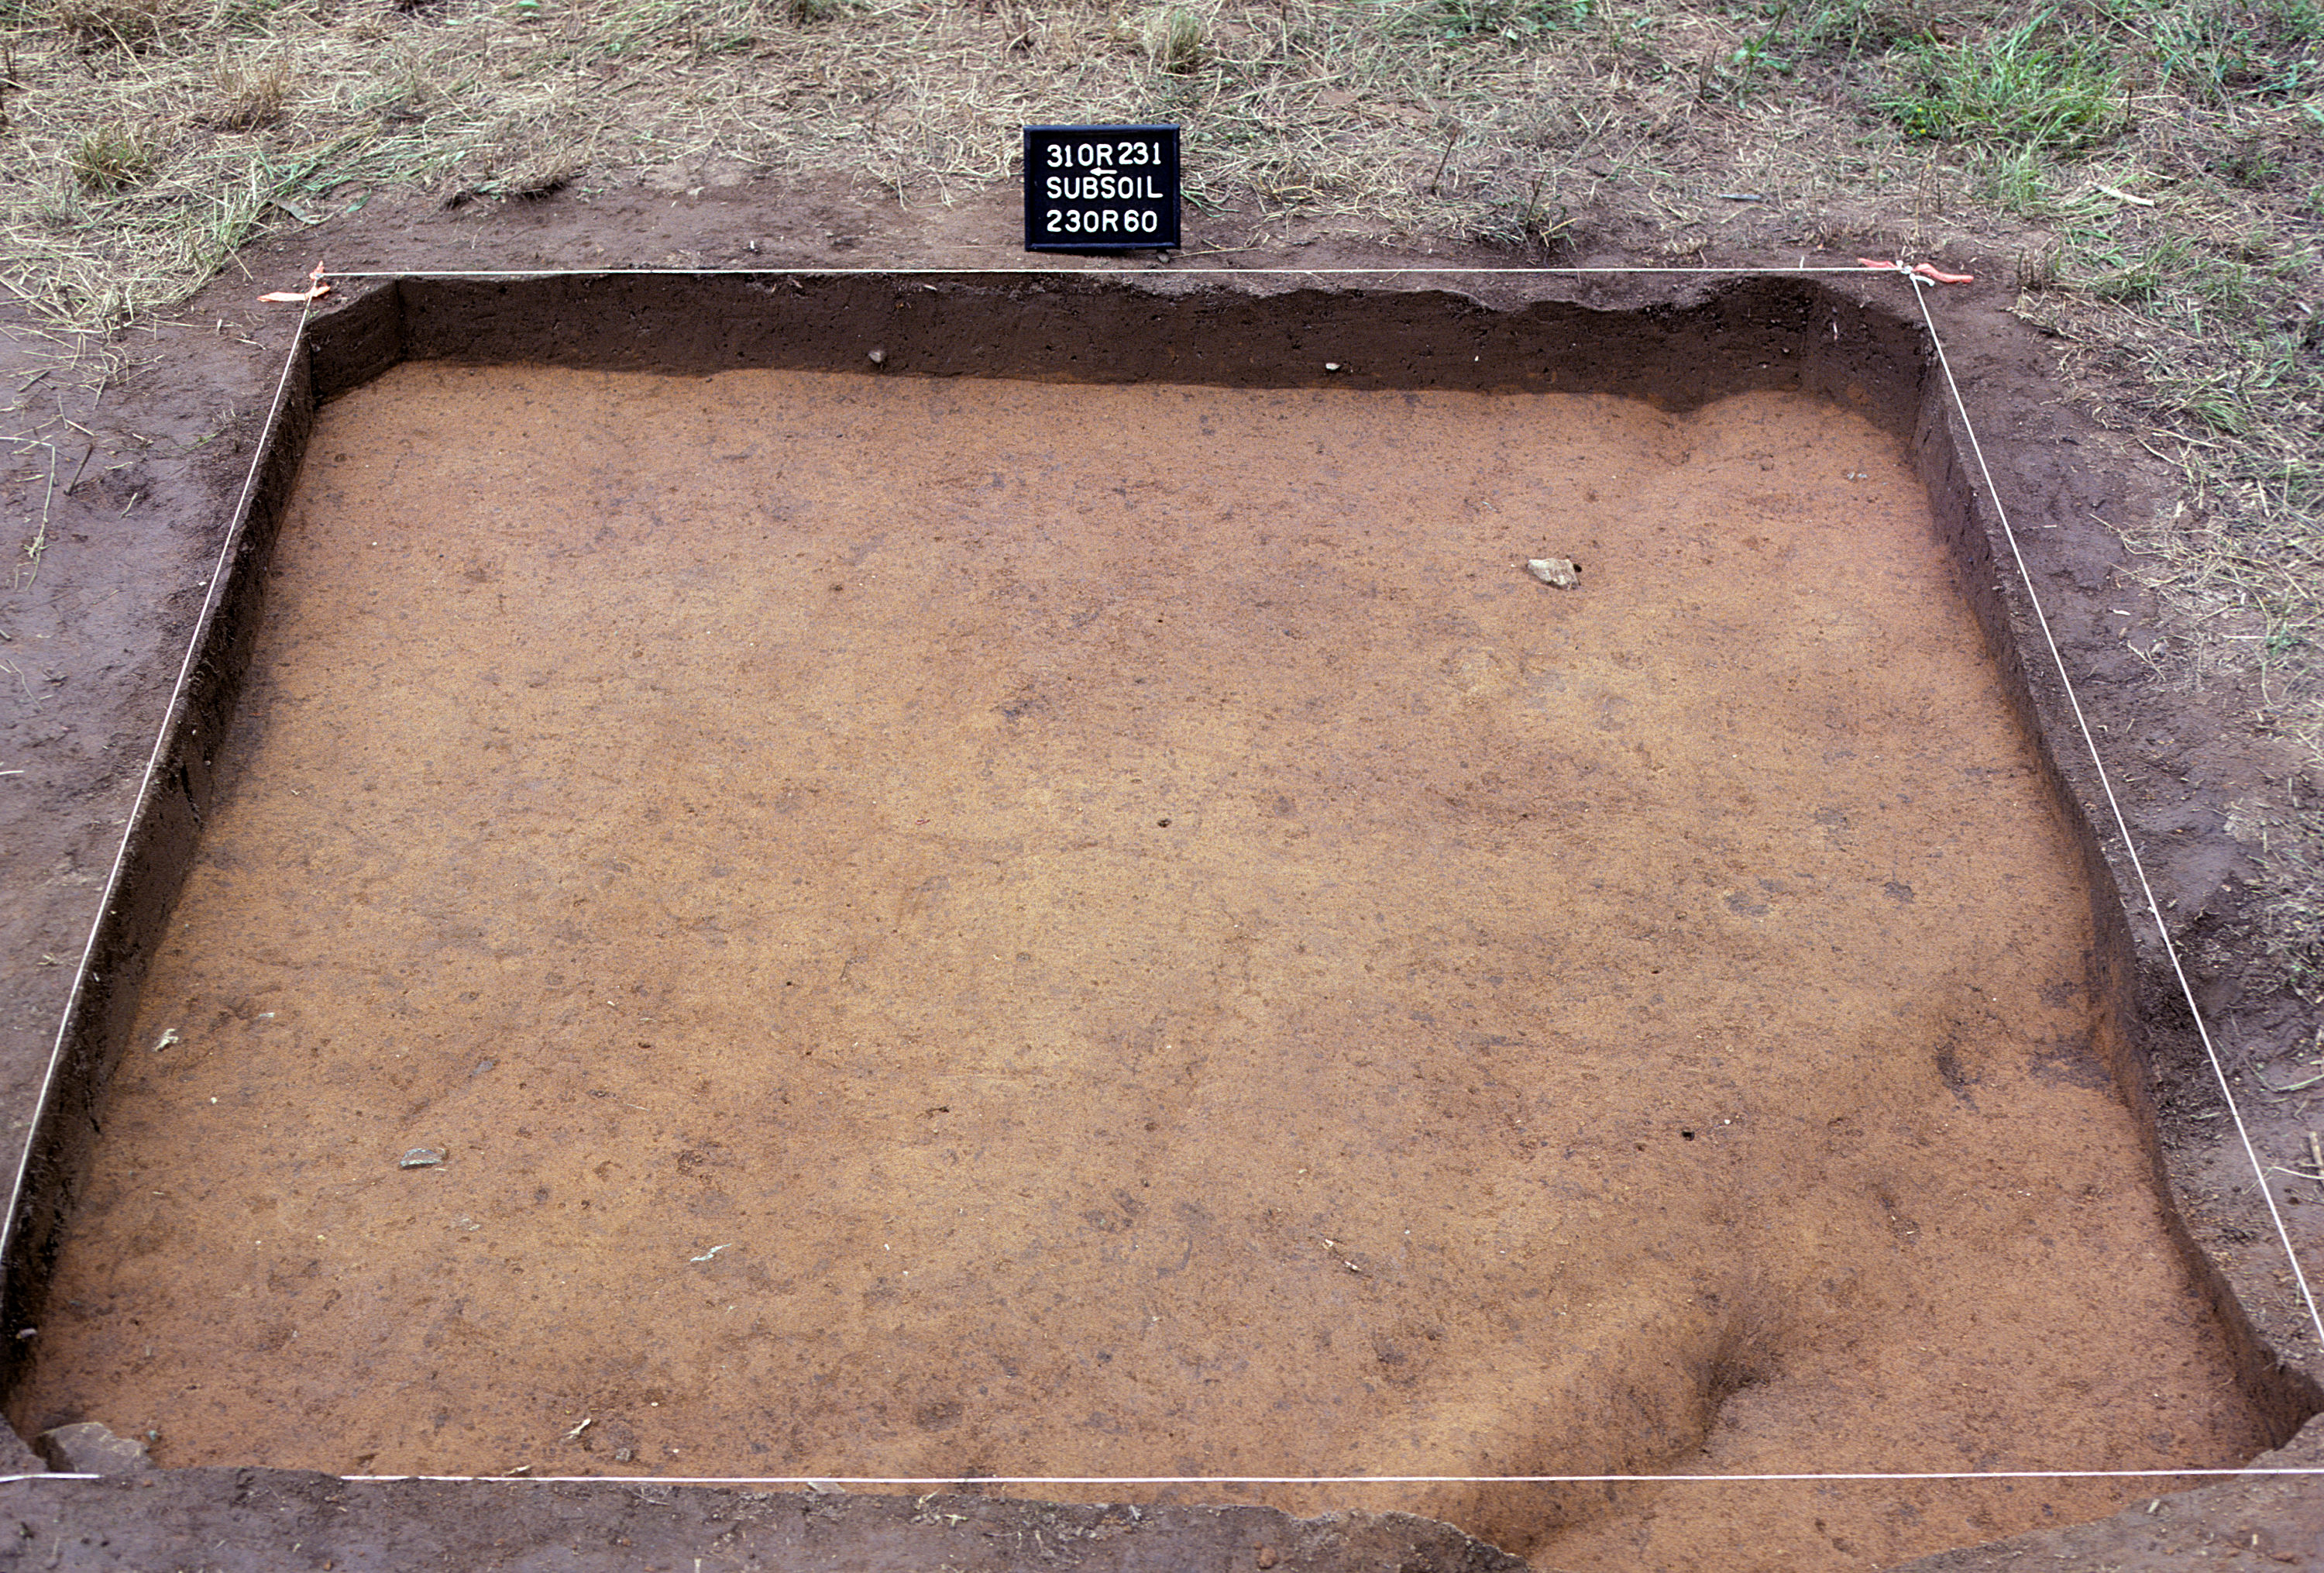 Figure 833. Sq. 230R60 at top of subsoil (view to east).